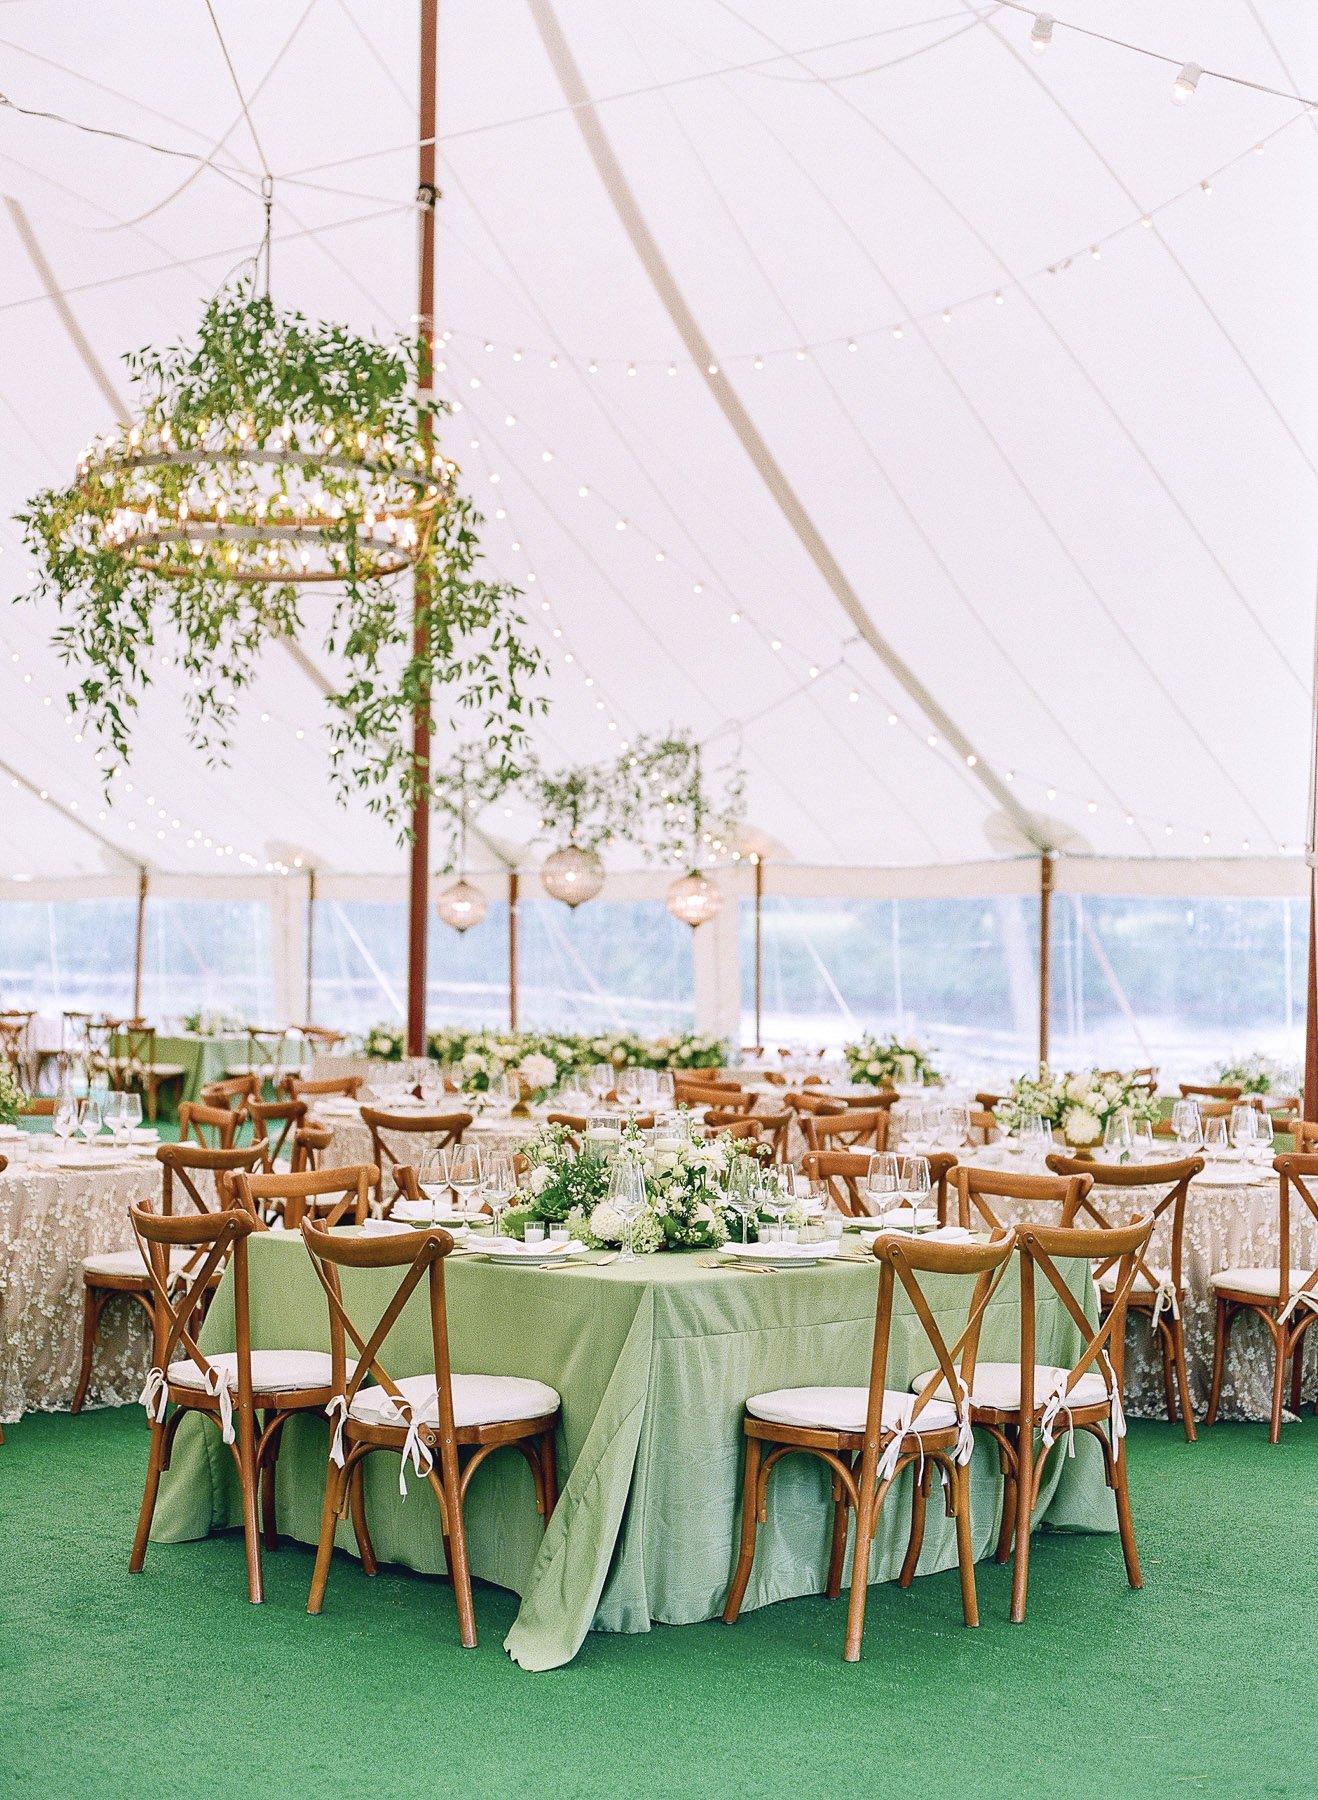 Incredible tent decor Private island wedding in upstate ny